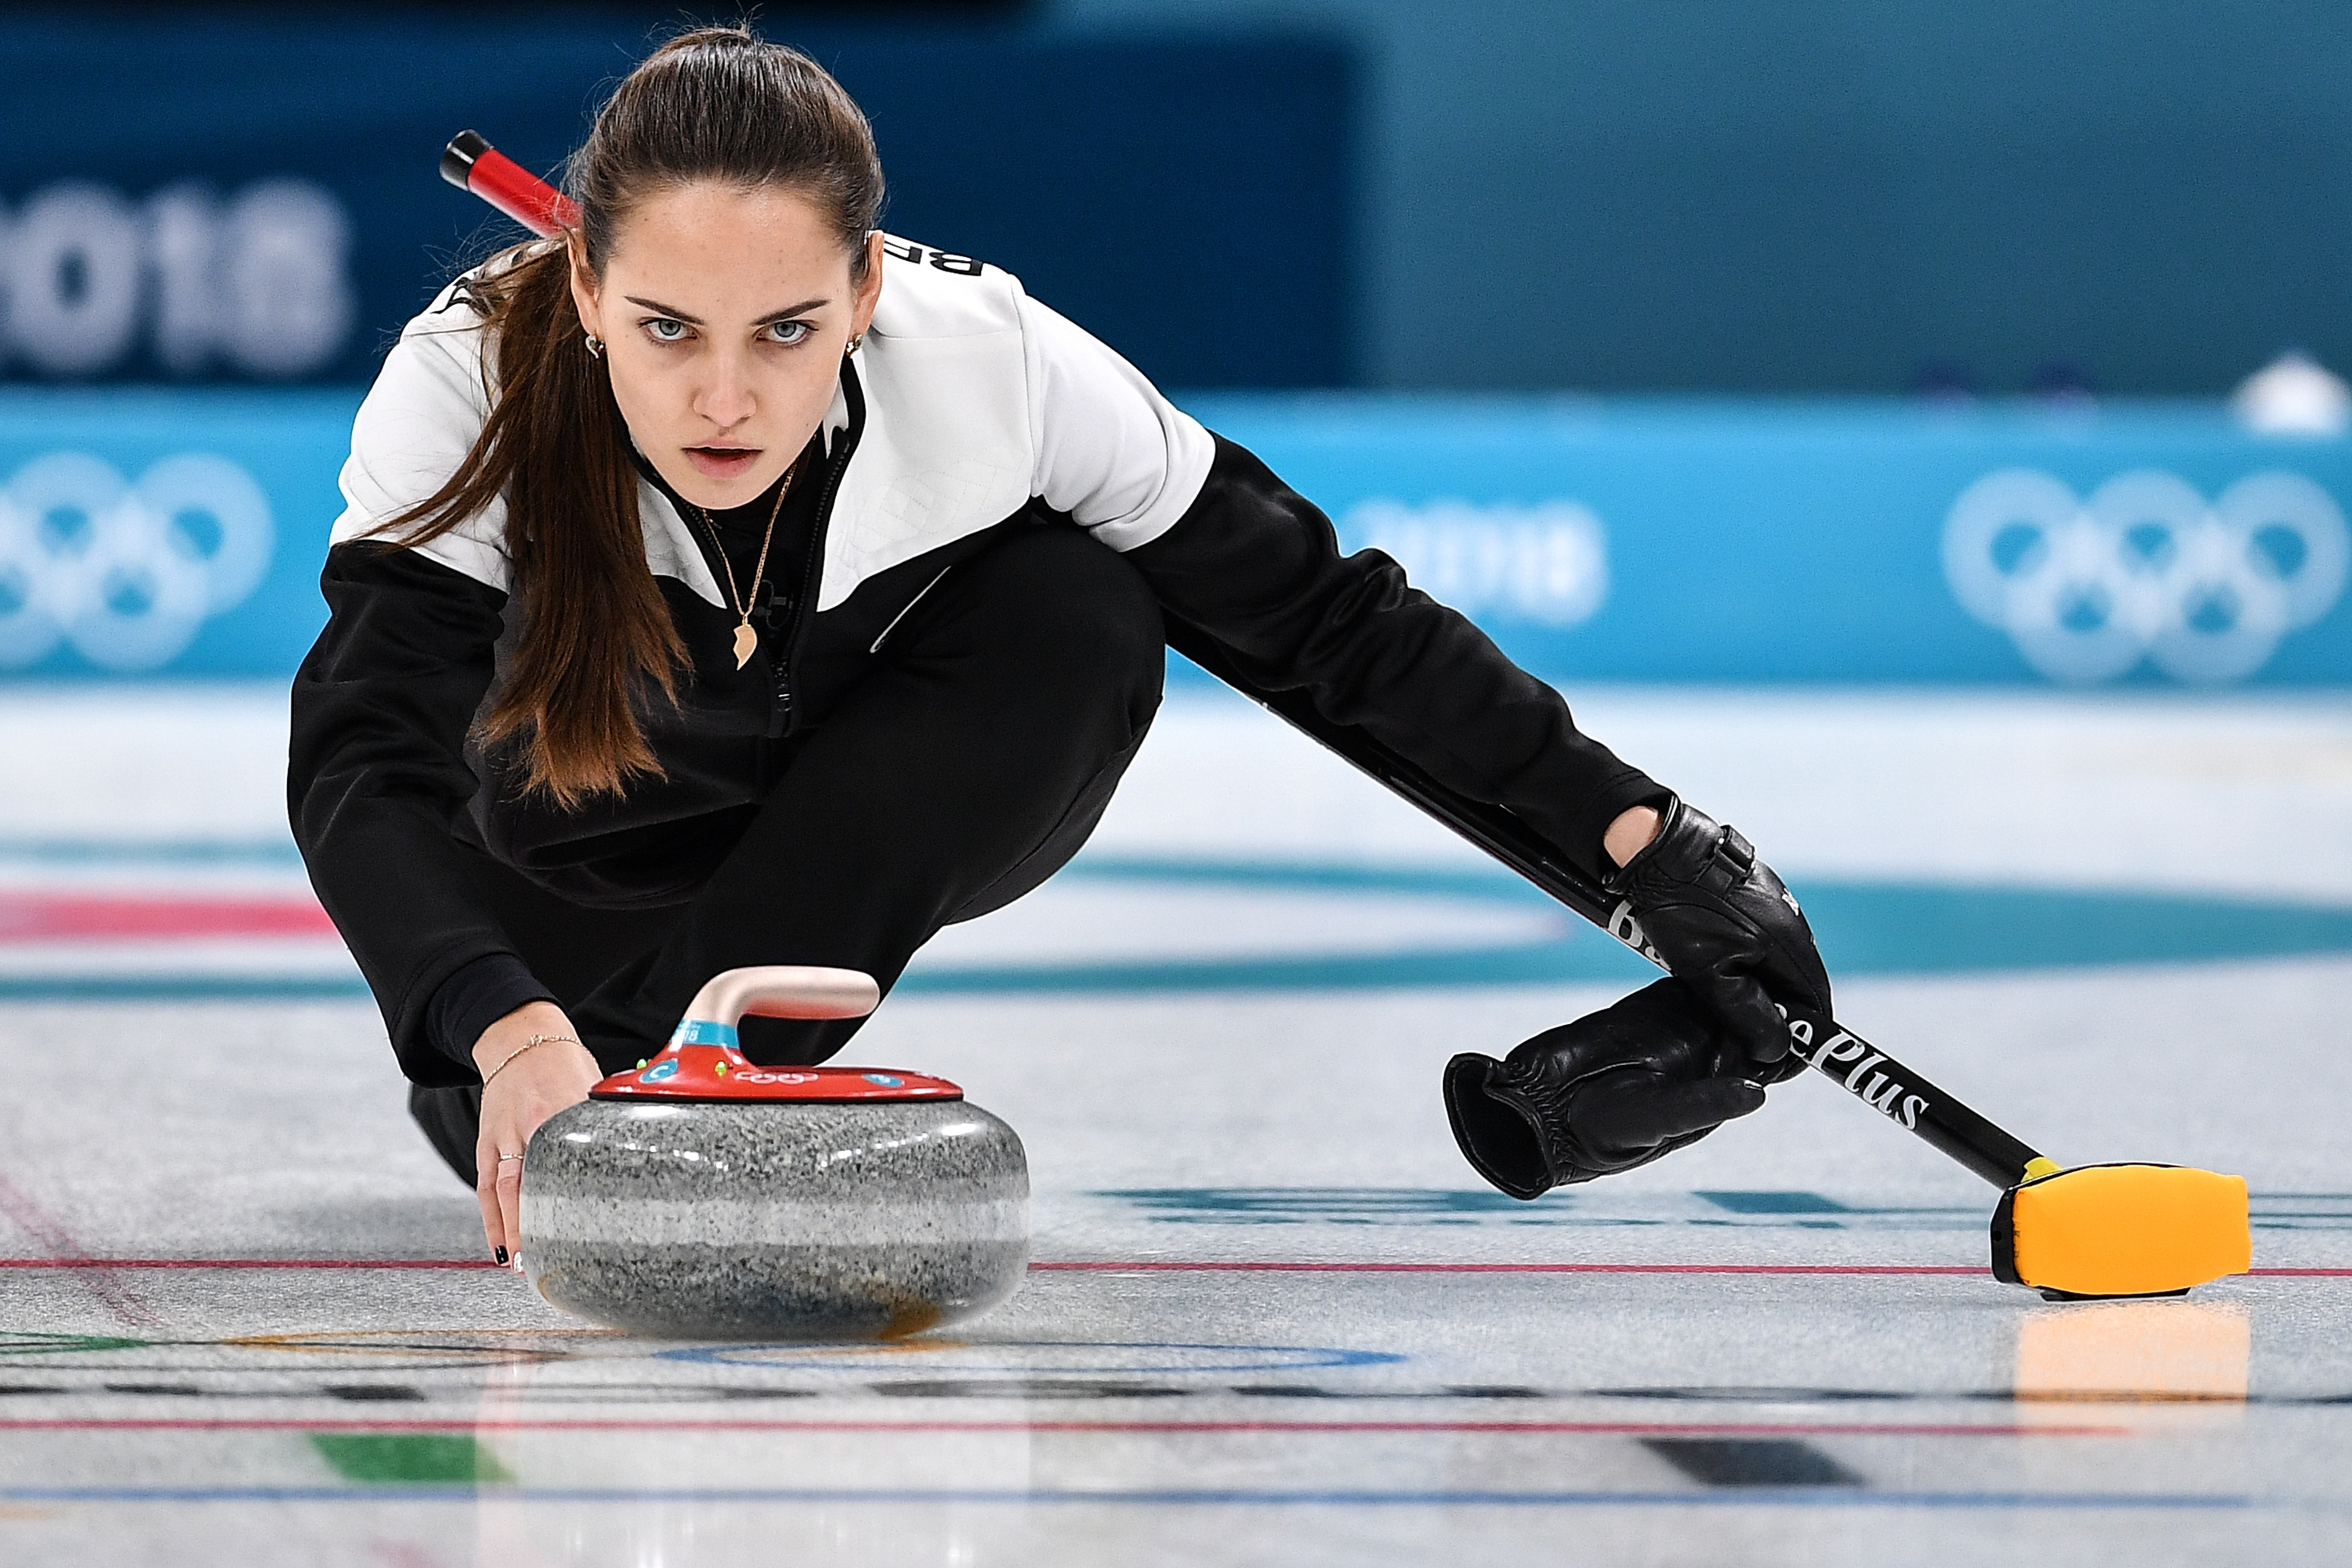 Curling: Anastasia Bryzgalova, A Russian curler, The 2016 World Mixed Doubles Curling Championship gold medalist. 3100x2070 HD Background.